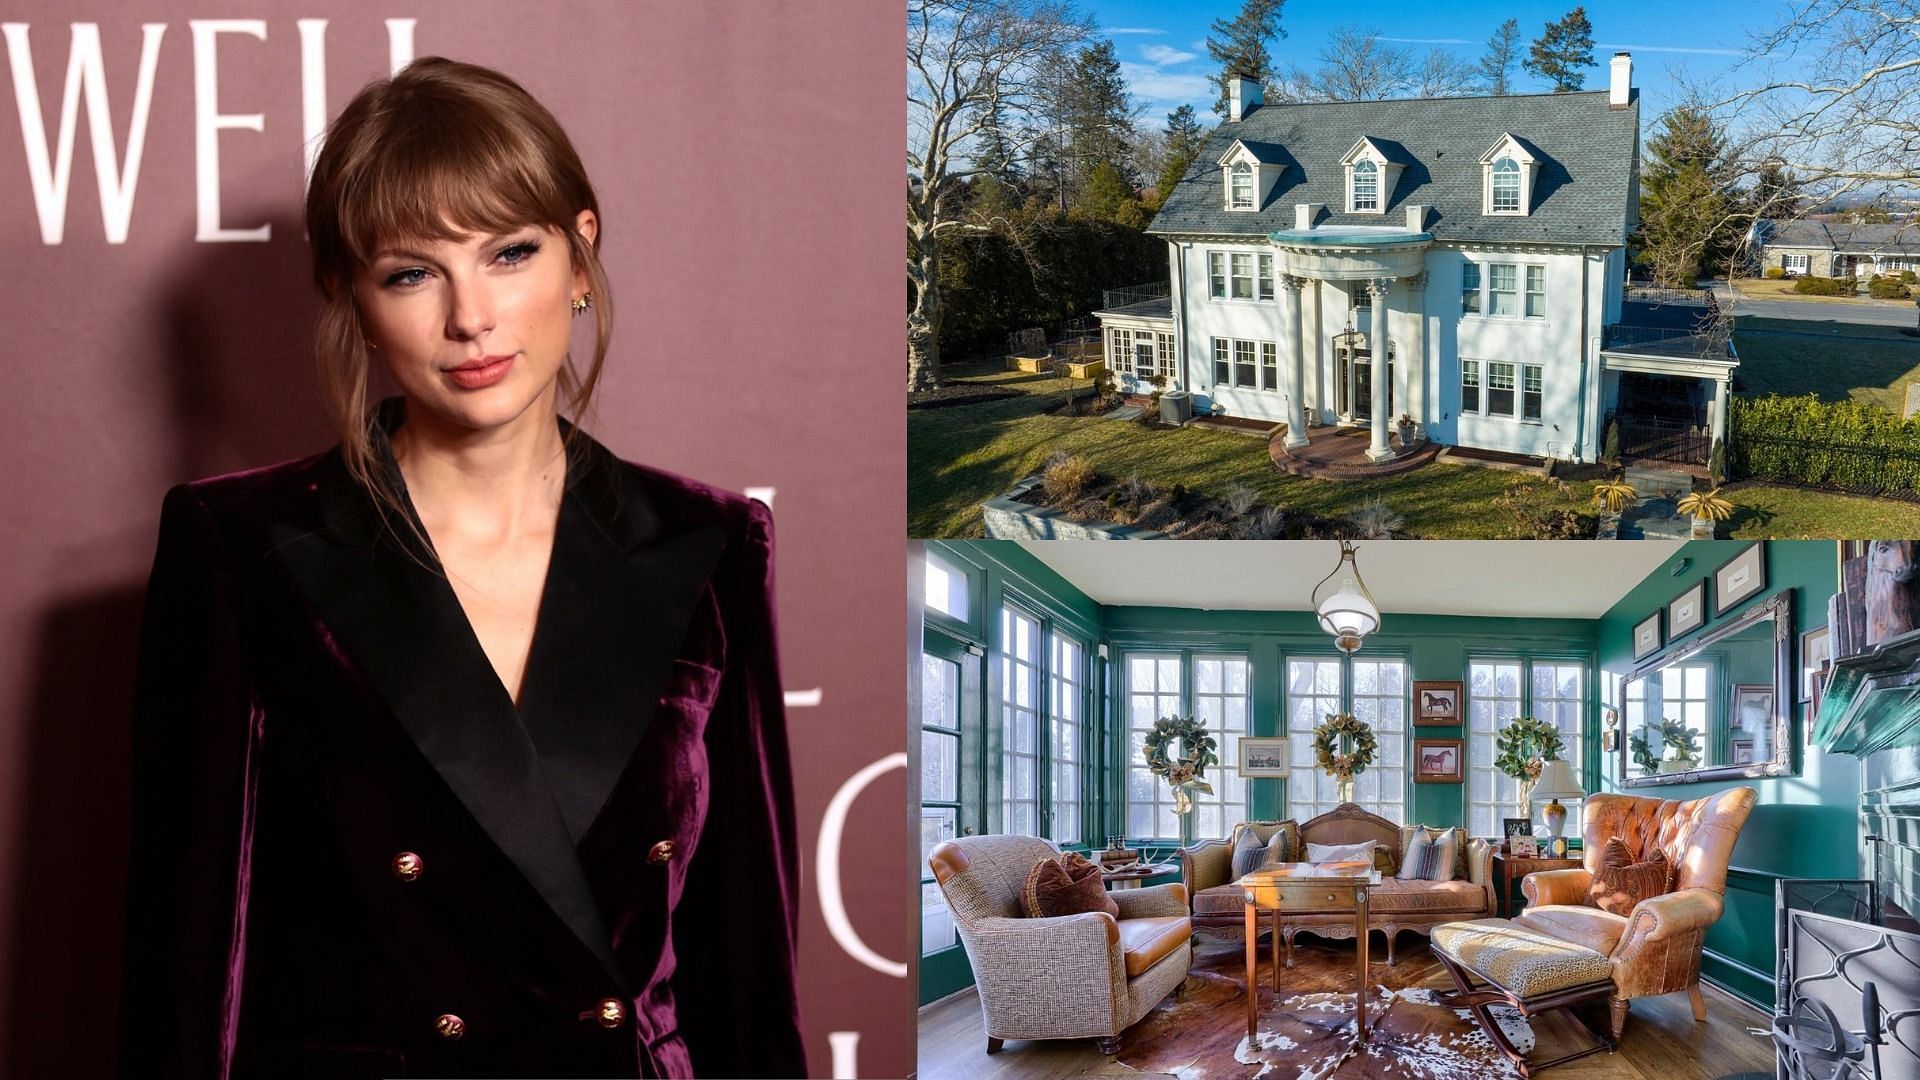 Taylor Swift's childhood home sells for 1 million